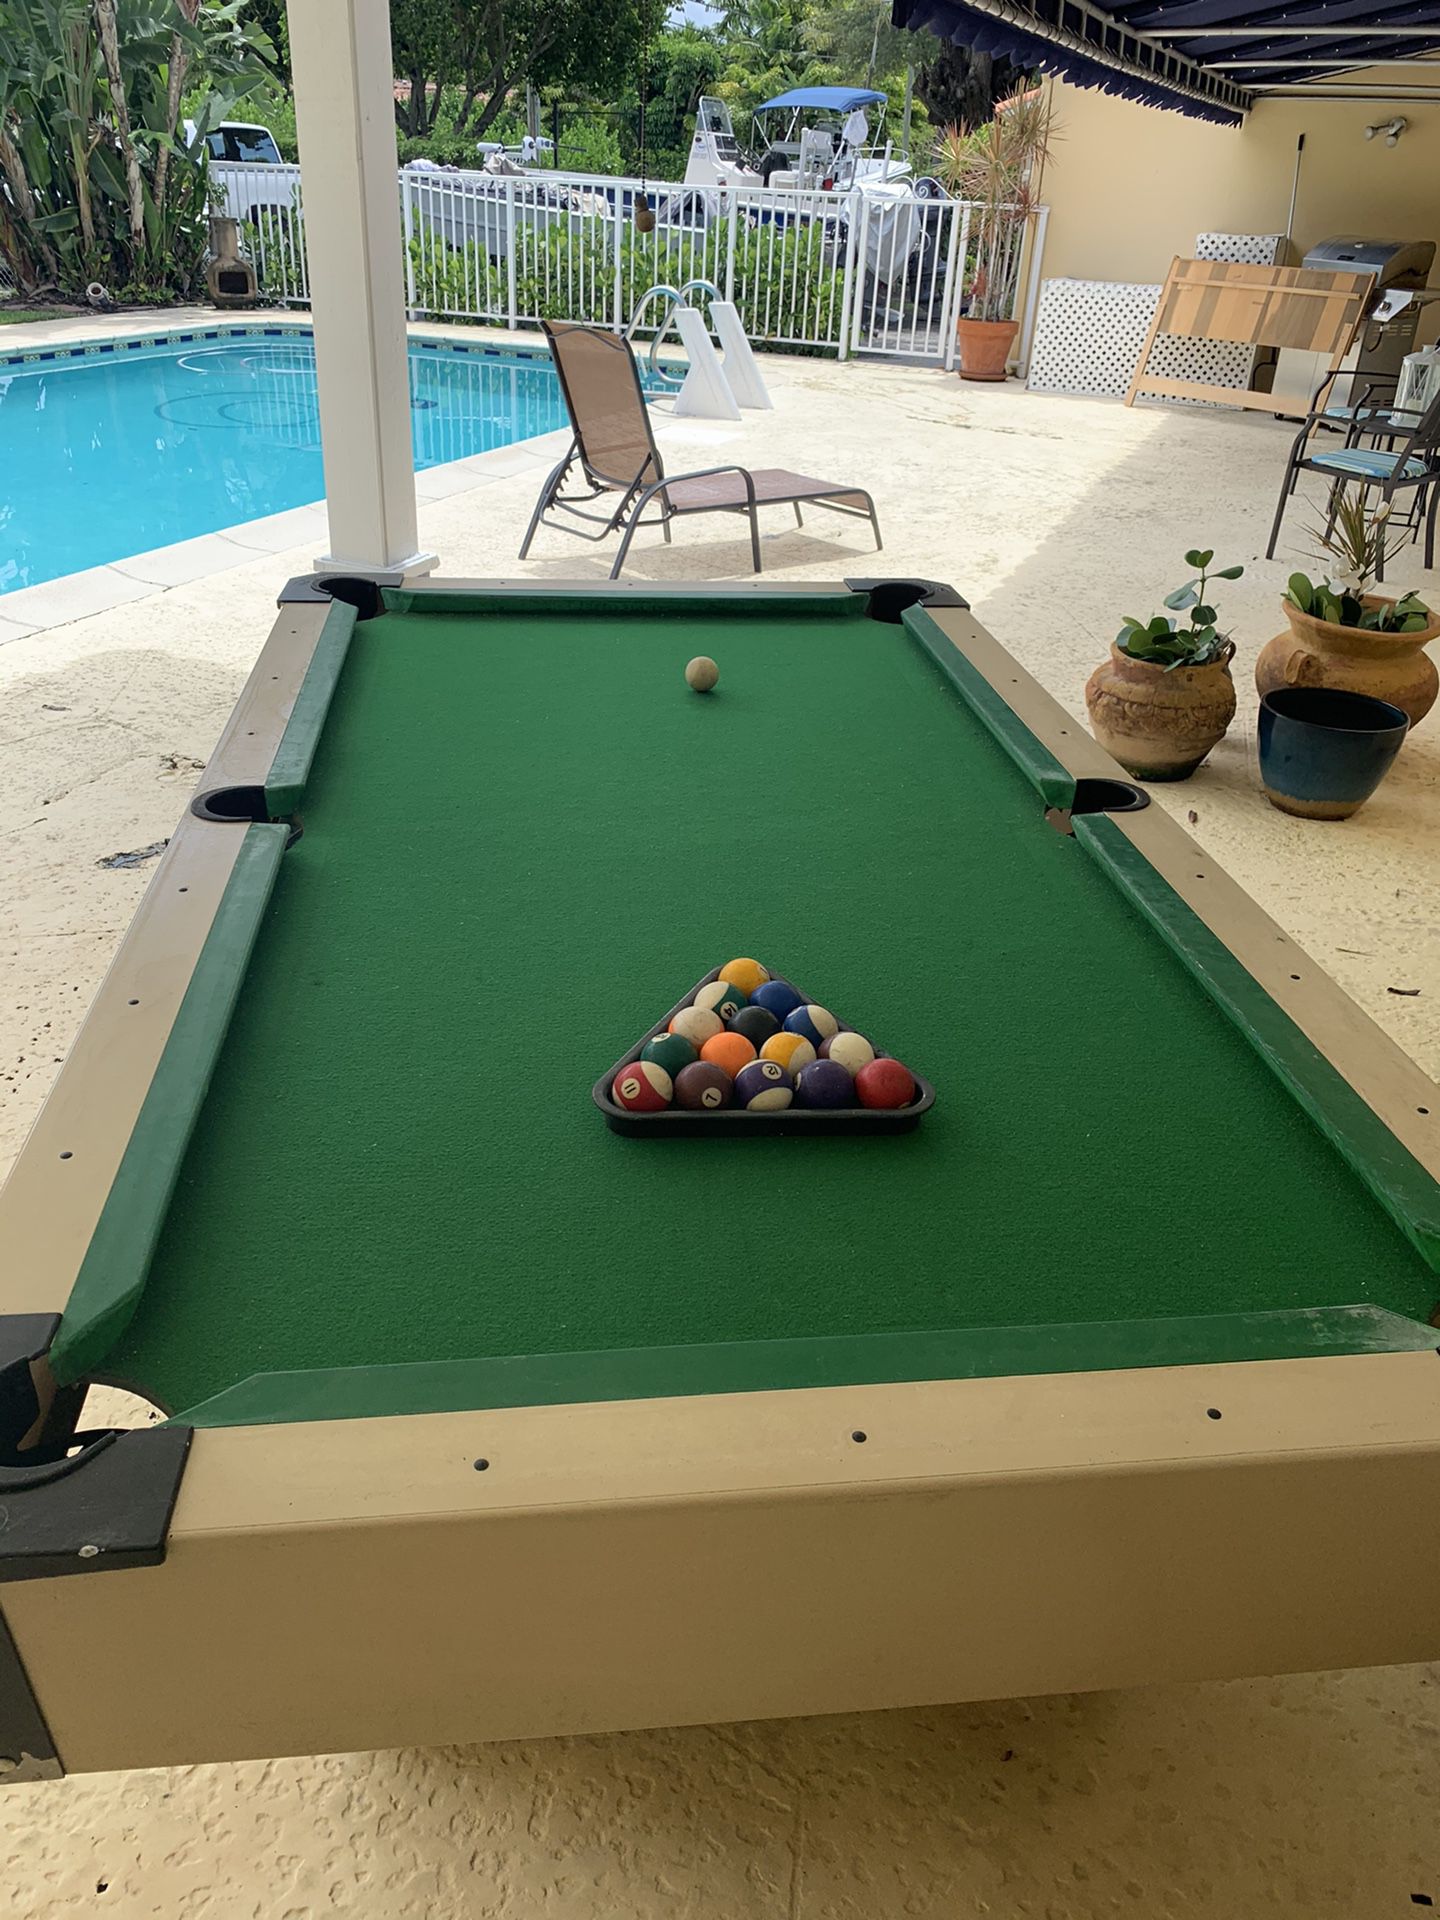 Outdoor Pool Table “The Super Table” Used